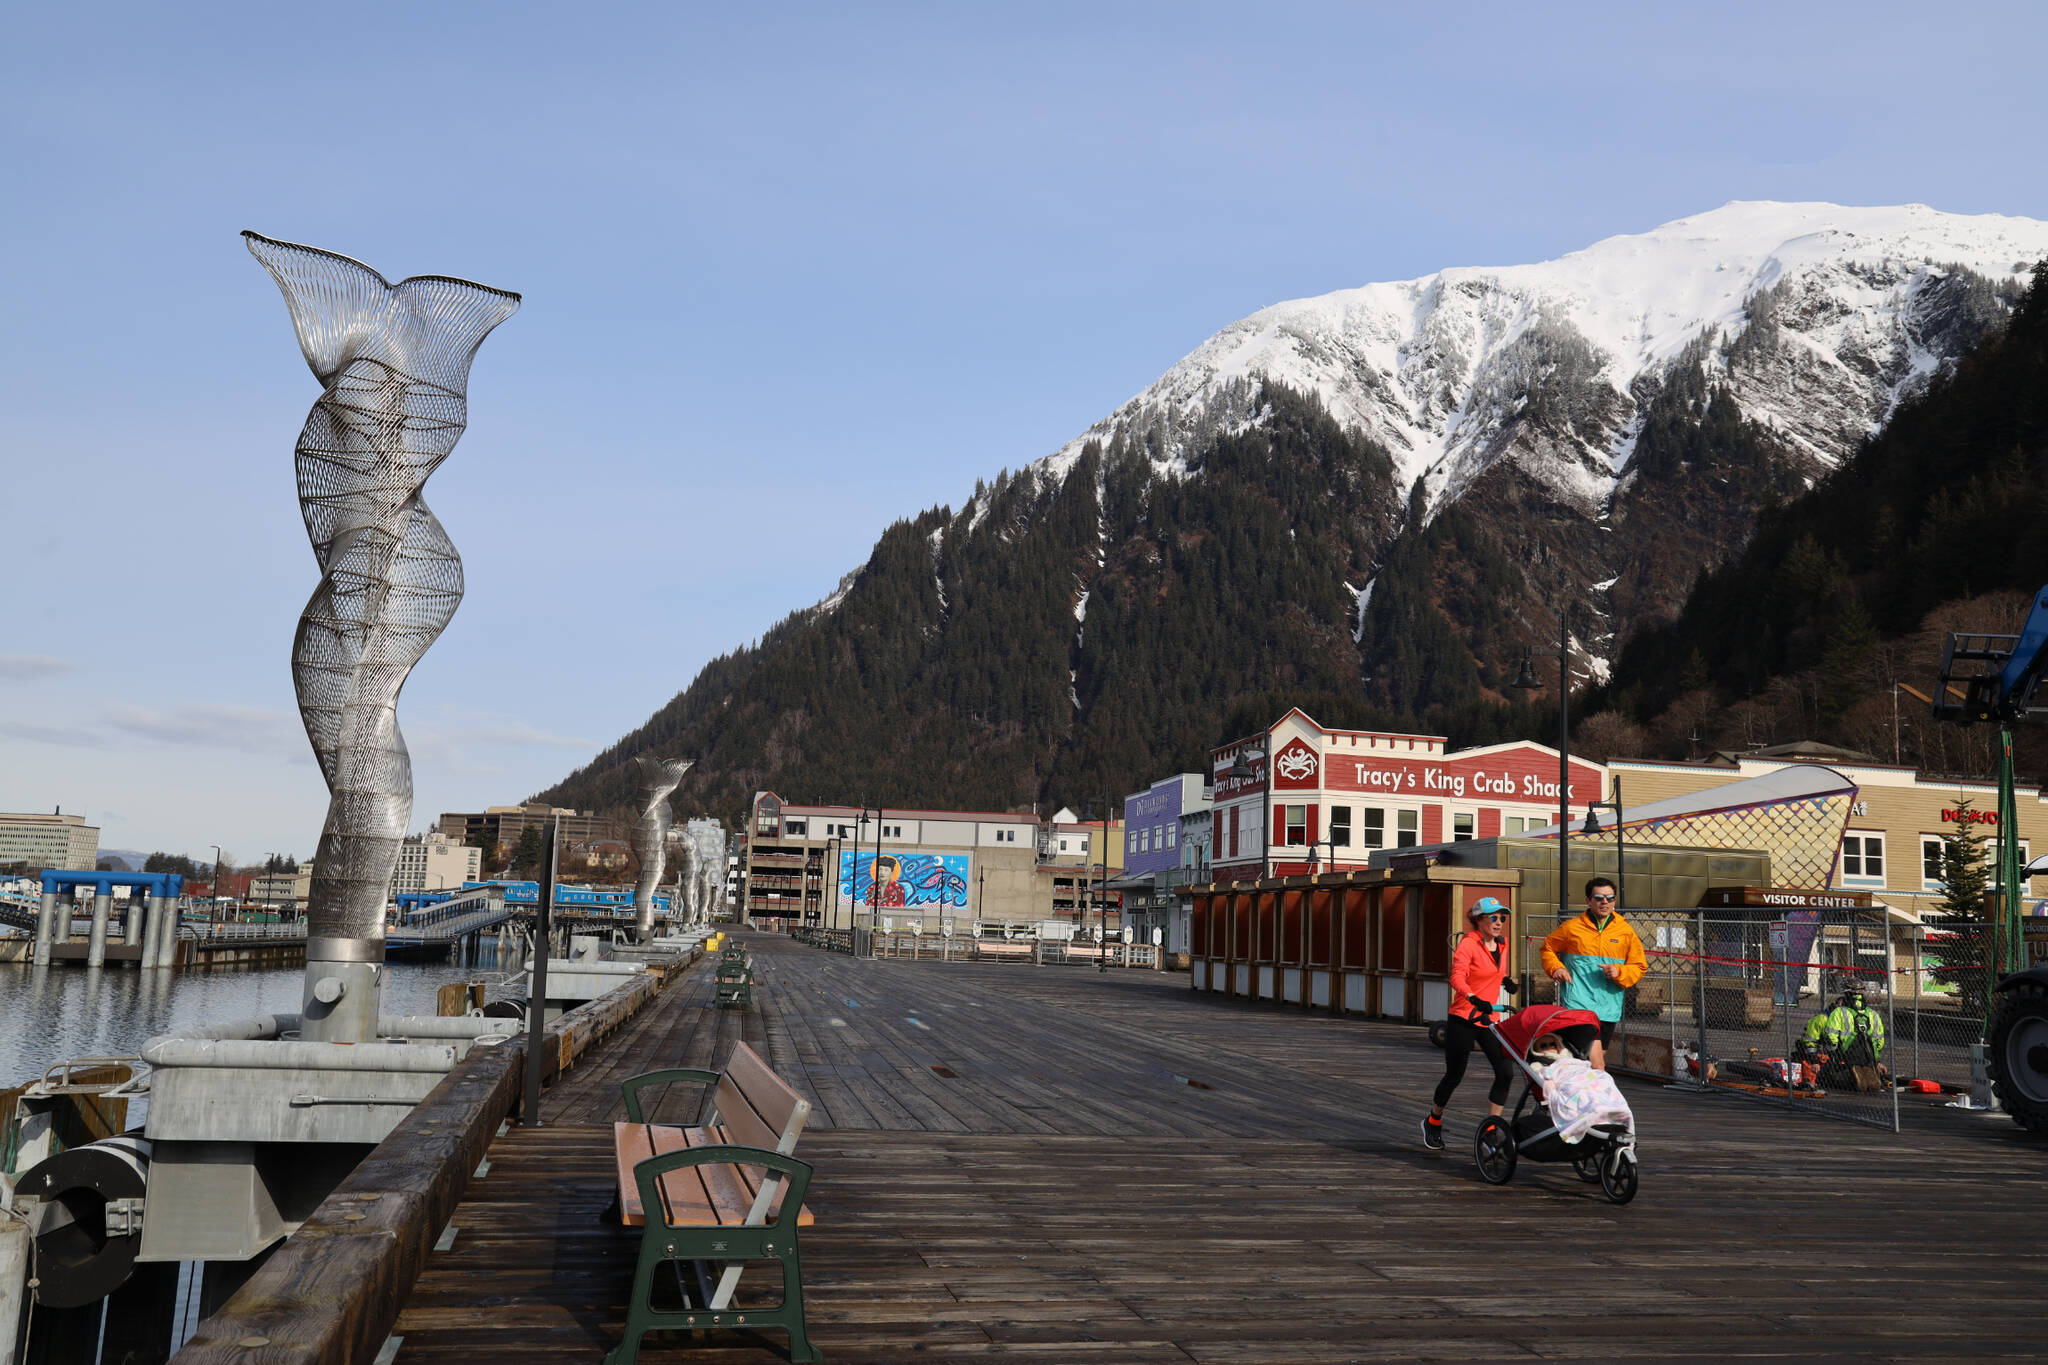 Residents jog along the downtown cruise ship docks Friday morning. Downtown is about to become much busier starting Monday as Juneau welcomes the first cruise ship of the 2023 season. (Clarise Larson / Juneau Empire)